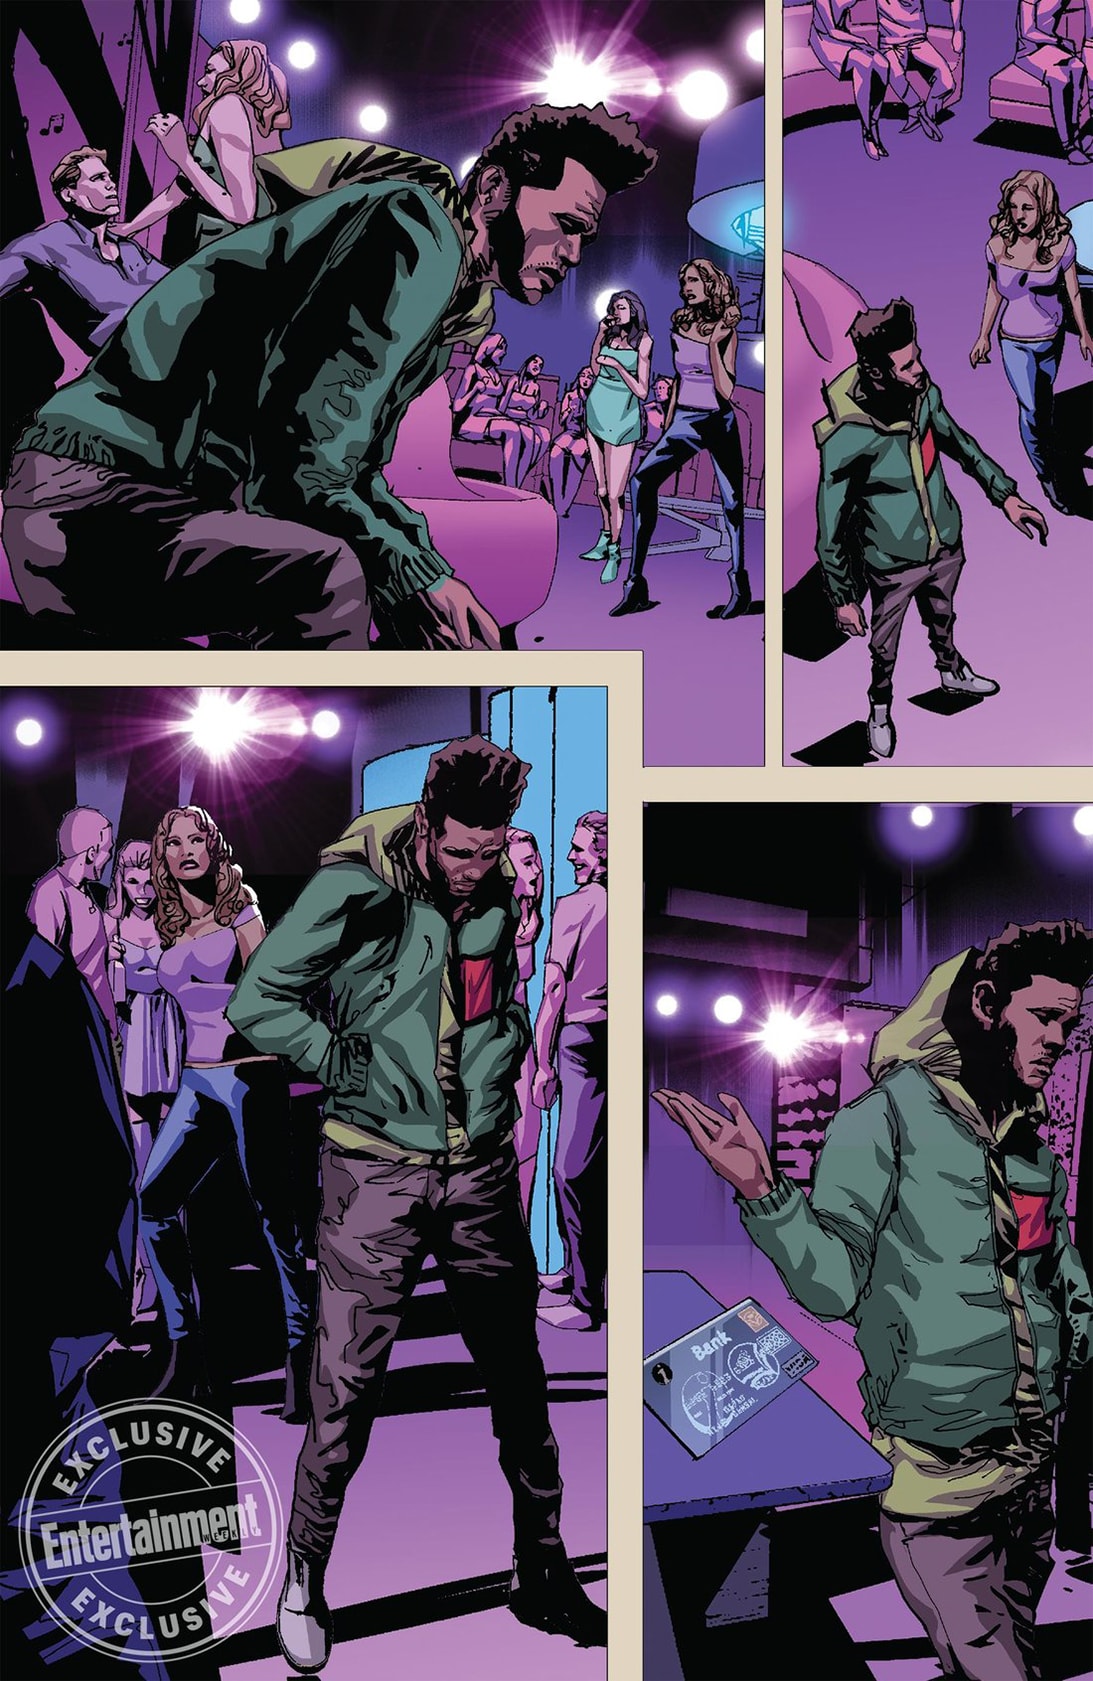 The Weeknd Starboy Marvel Comic inside preview june 13 release april 19 2018 debut launch exclusive abel tesfaye